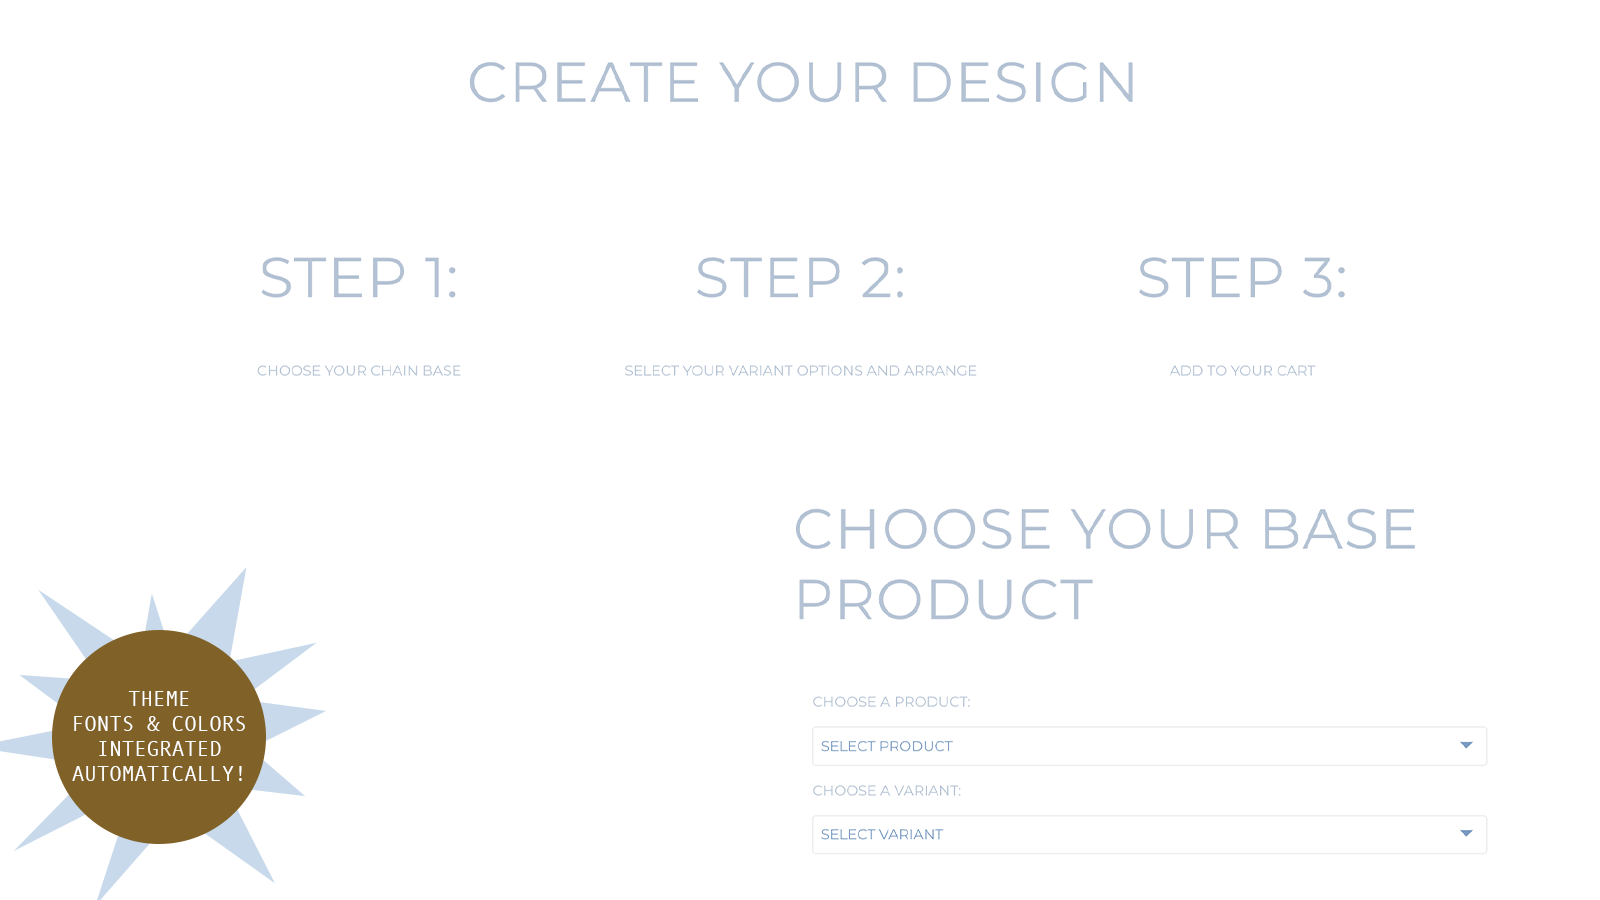 Select Your Product Variants; Theme Automated Fonts and Colors 